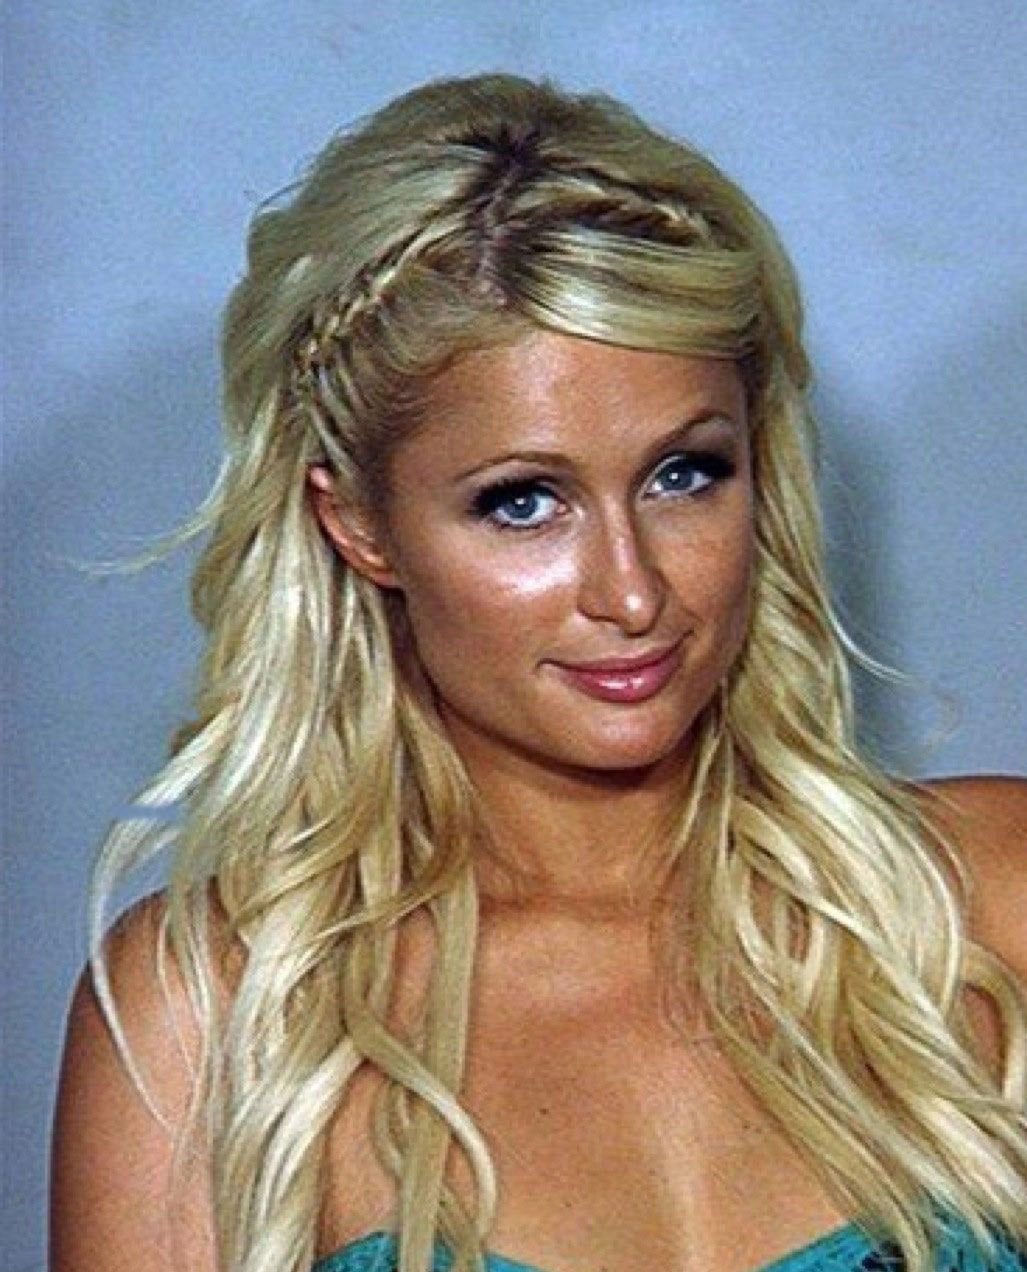 Celebrity heiress Paris Hilton, then 29, was arrested on drug charges in Las Vegas in August 2010